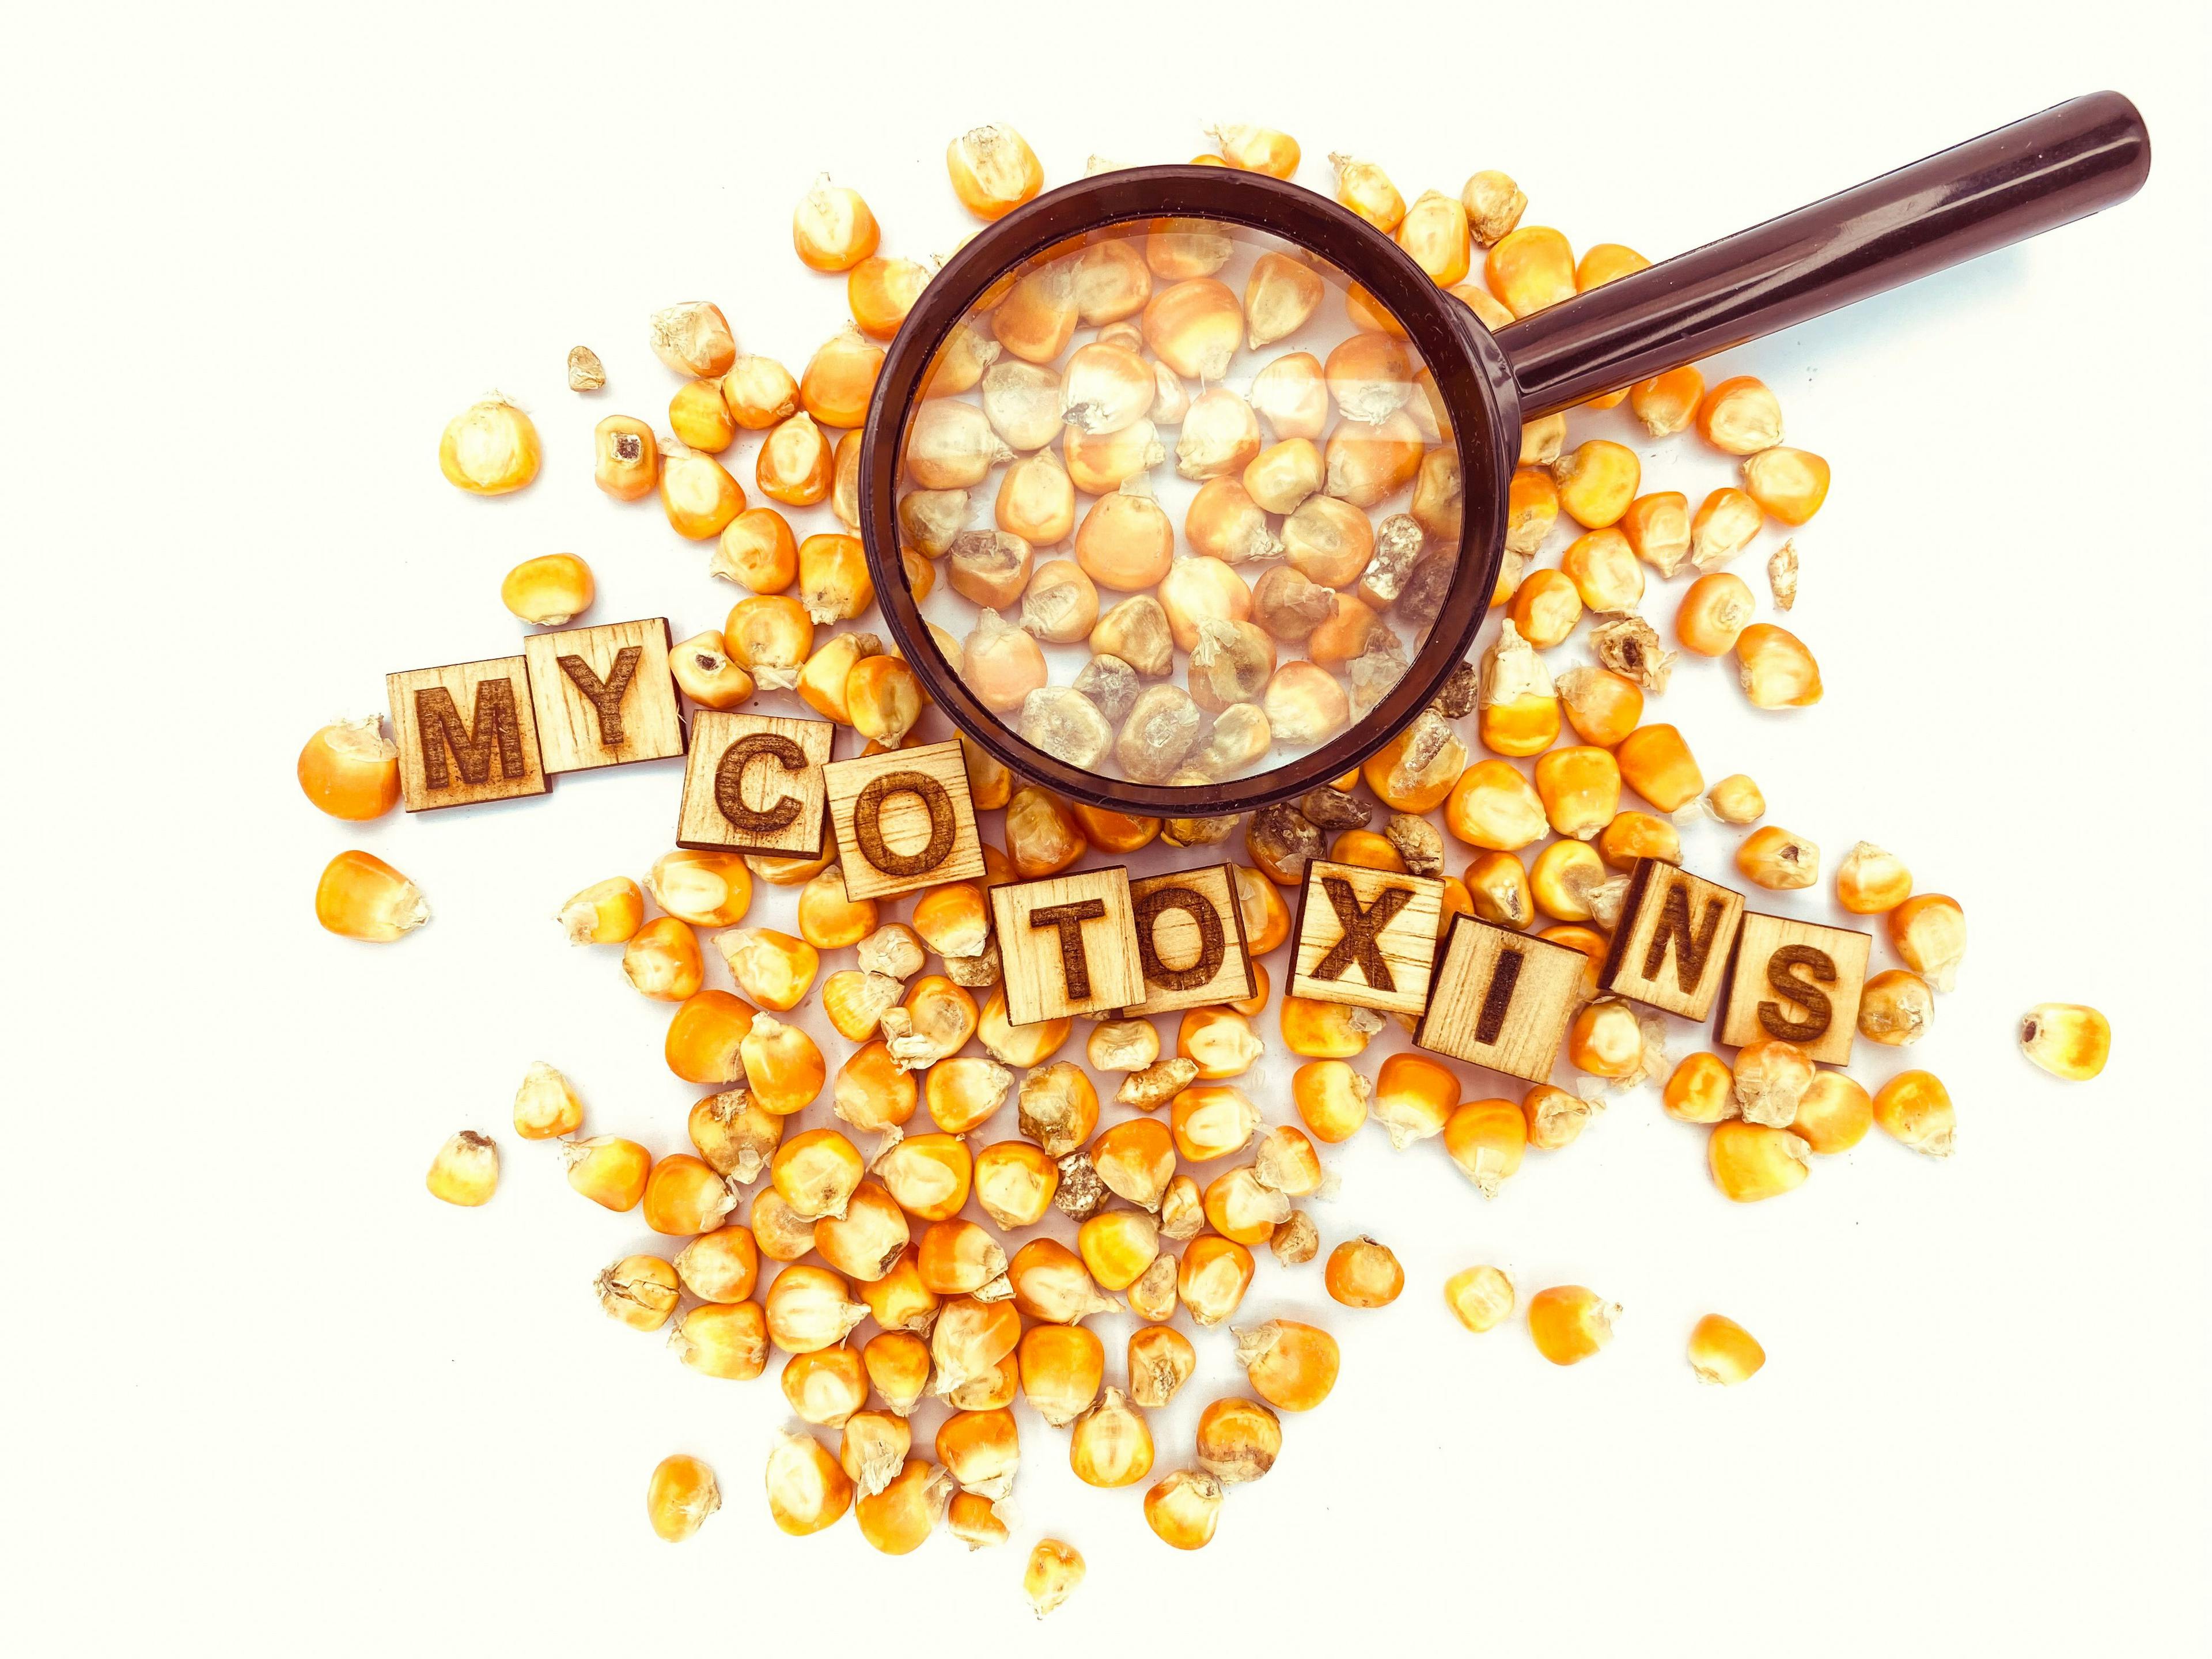 Awareness Mycotoxins in Corn for Animal feed | Image Credit: © Unique Graphics - stock.adobe.com